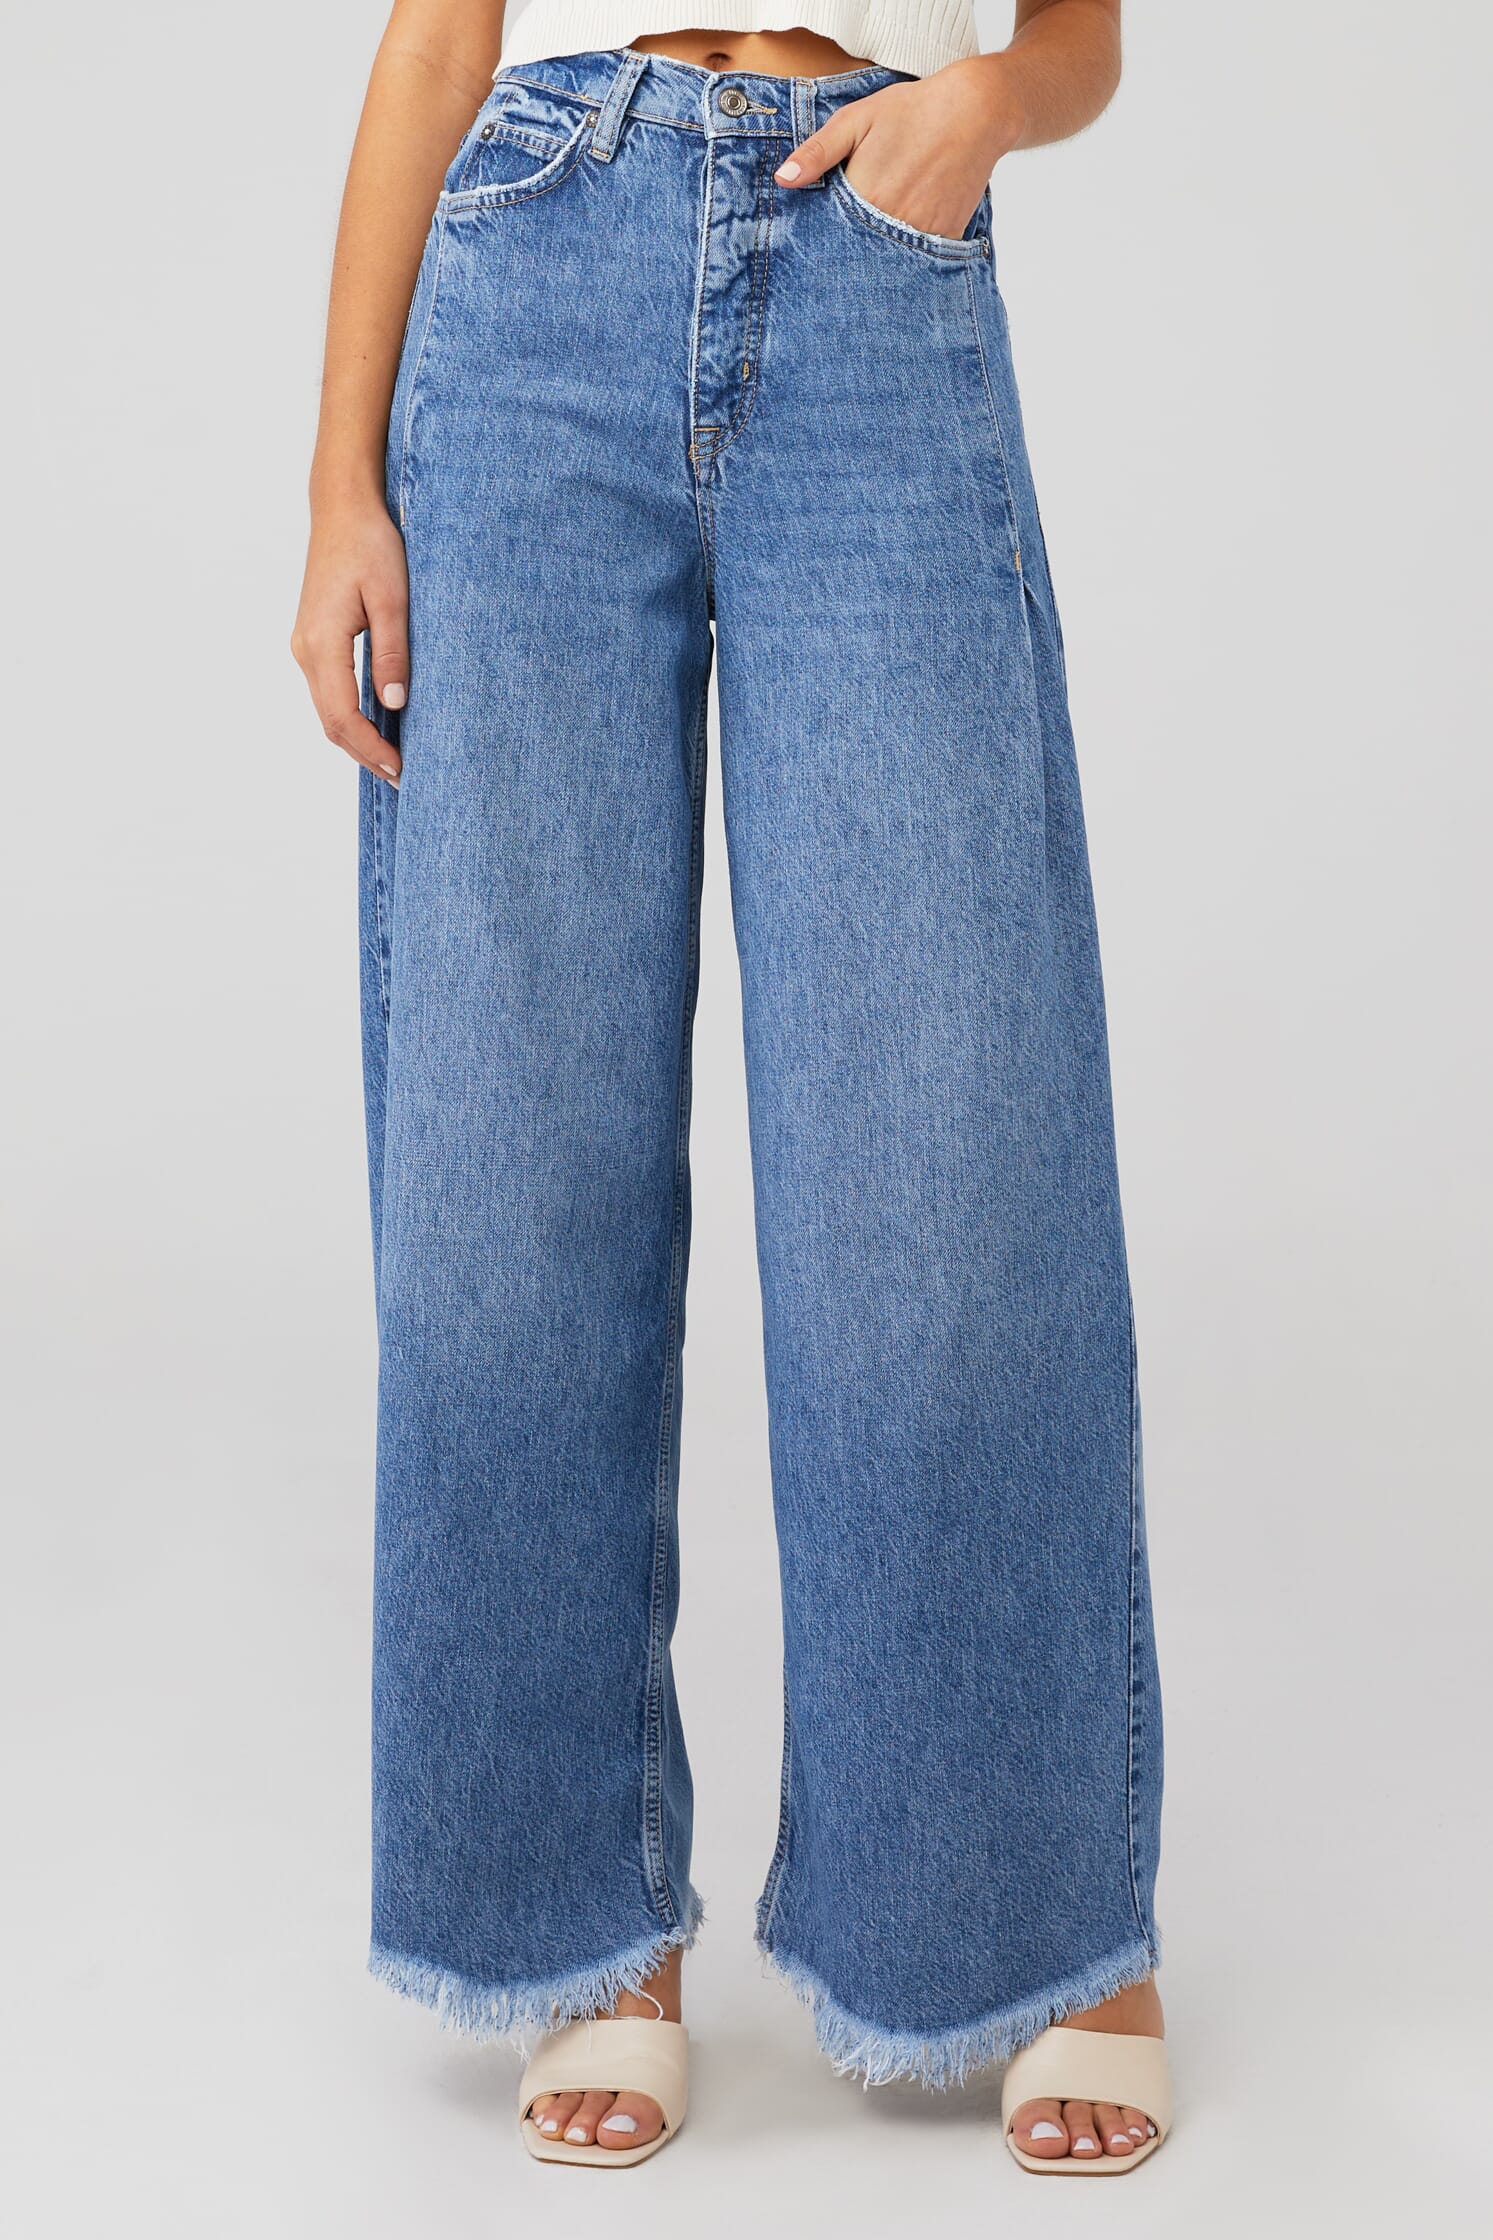 Free People | Old West Slouchy Jean in Canyon Blue| FashionPass